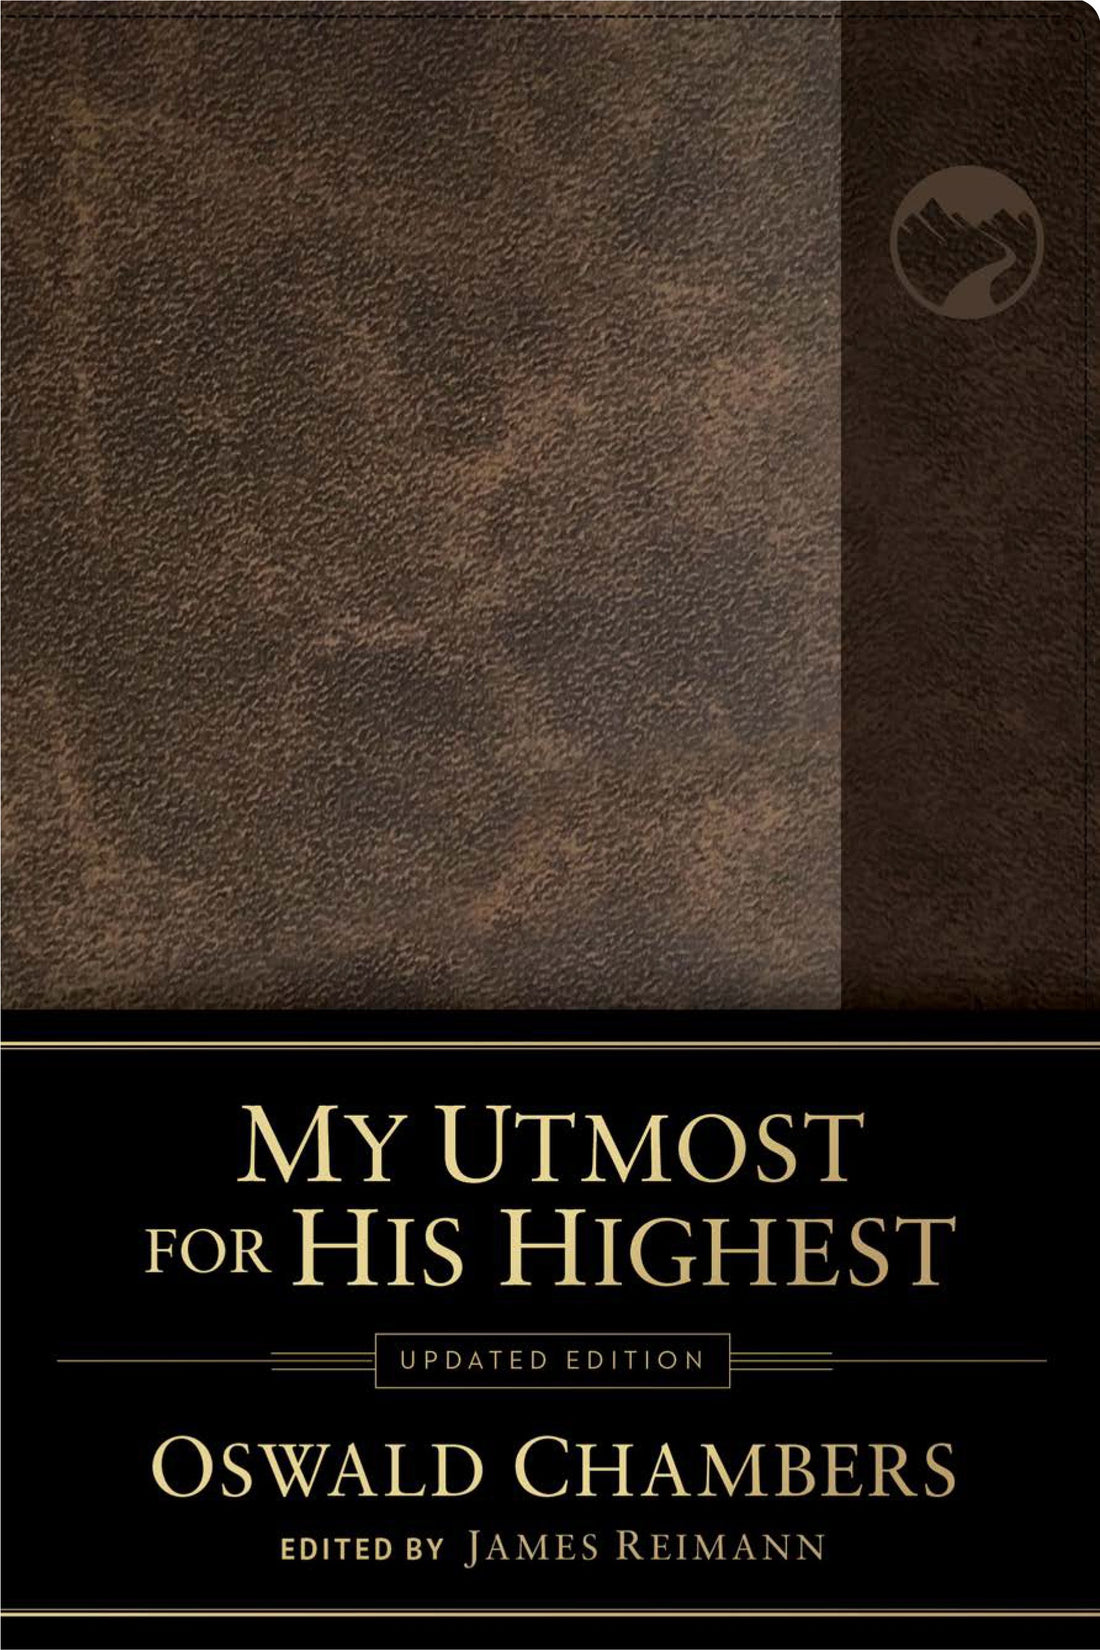 Seed of Abraham Christian Bookstore - (In)Courage - My Utmost For His Highest (Updated Edition)-Brown Bonded Leather